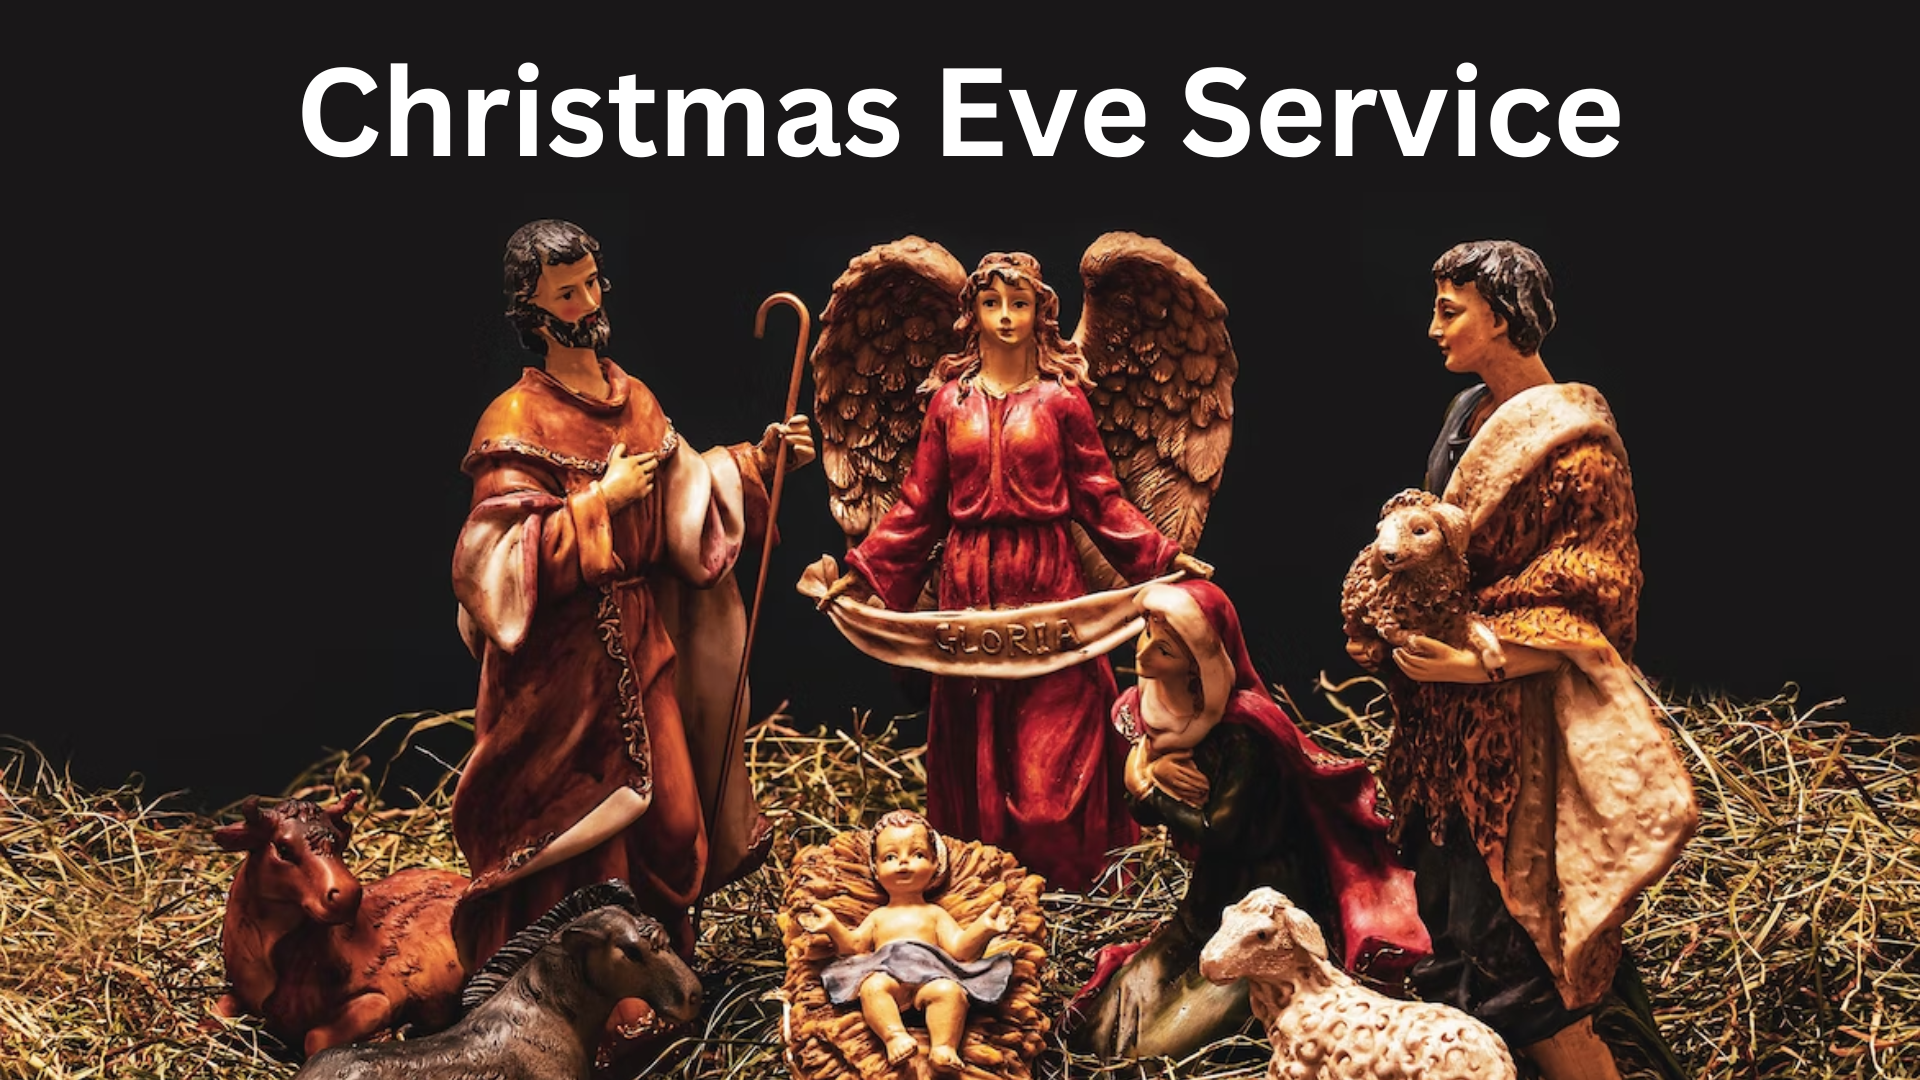 Nativity scene with text of Christmas Eve Service